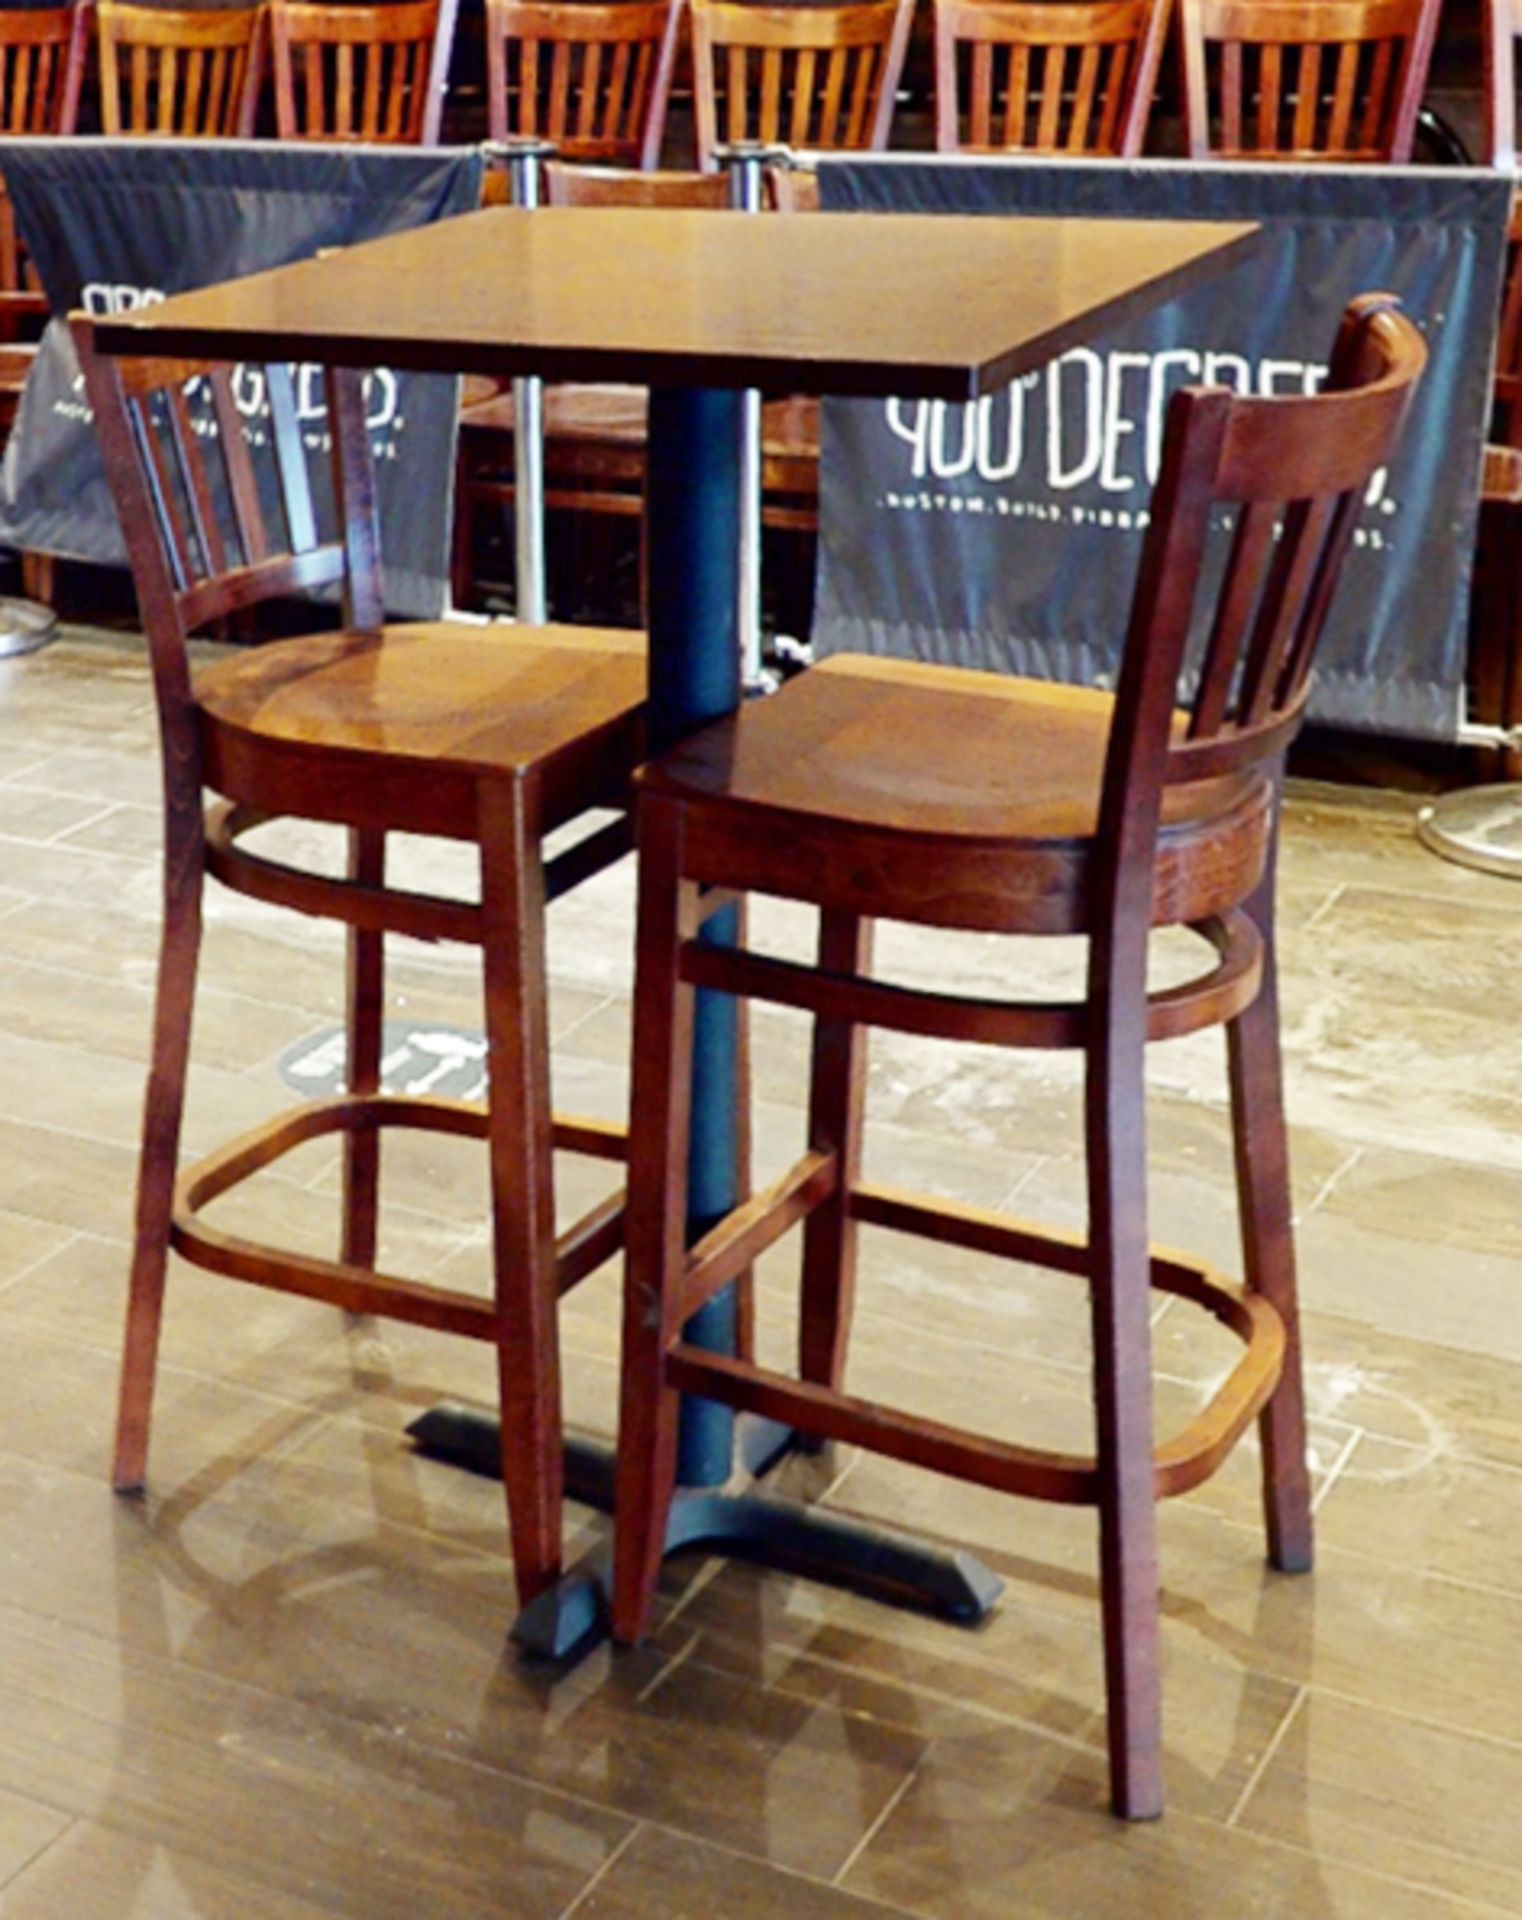 6 x Wooden Restaurant Barstools - CL701 - Location: Ashton Moss, Manchester, OL7Collections:This - Image 3 of 5